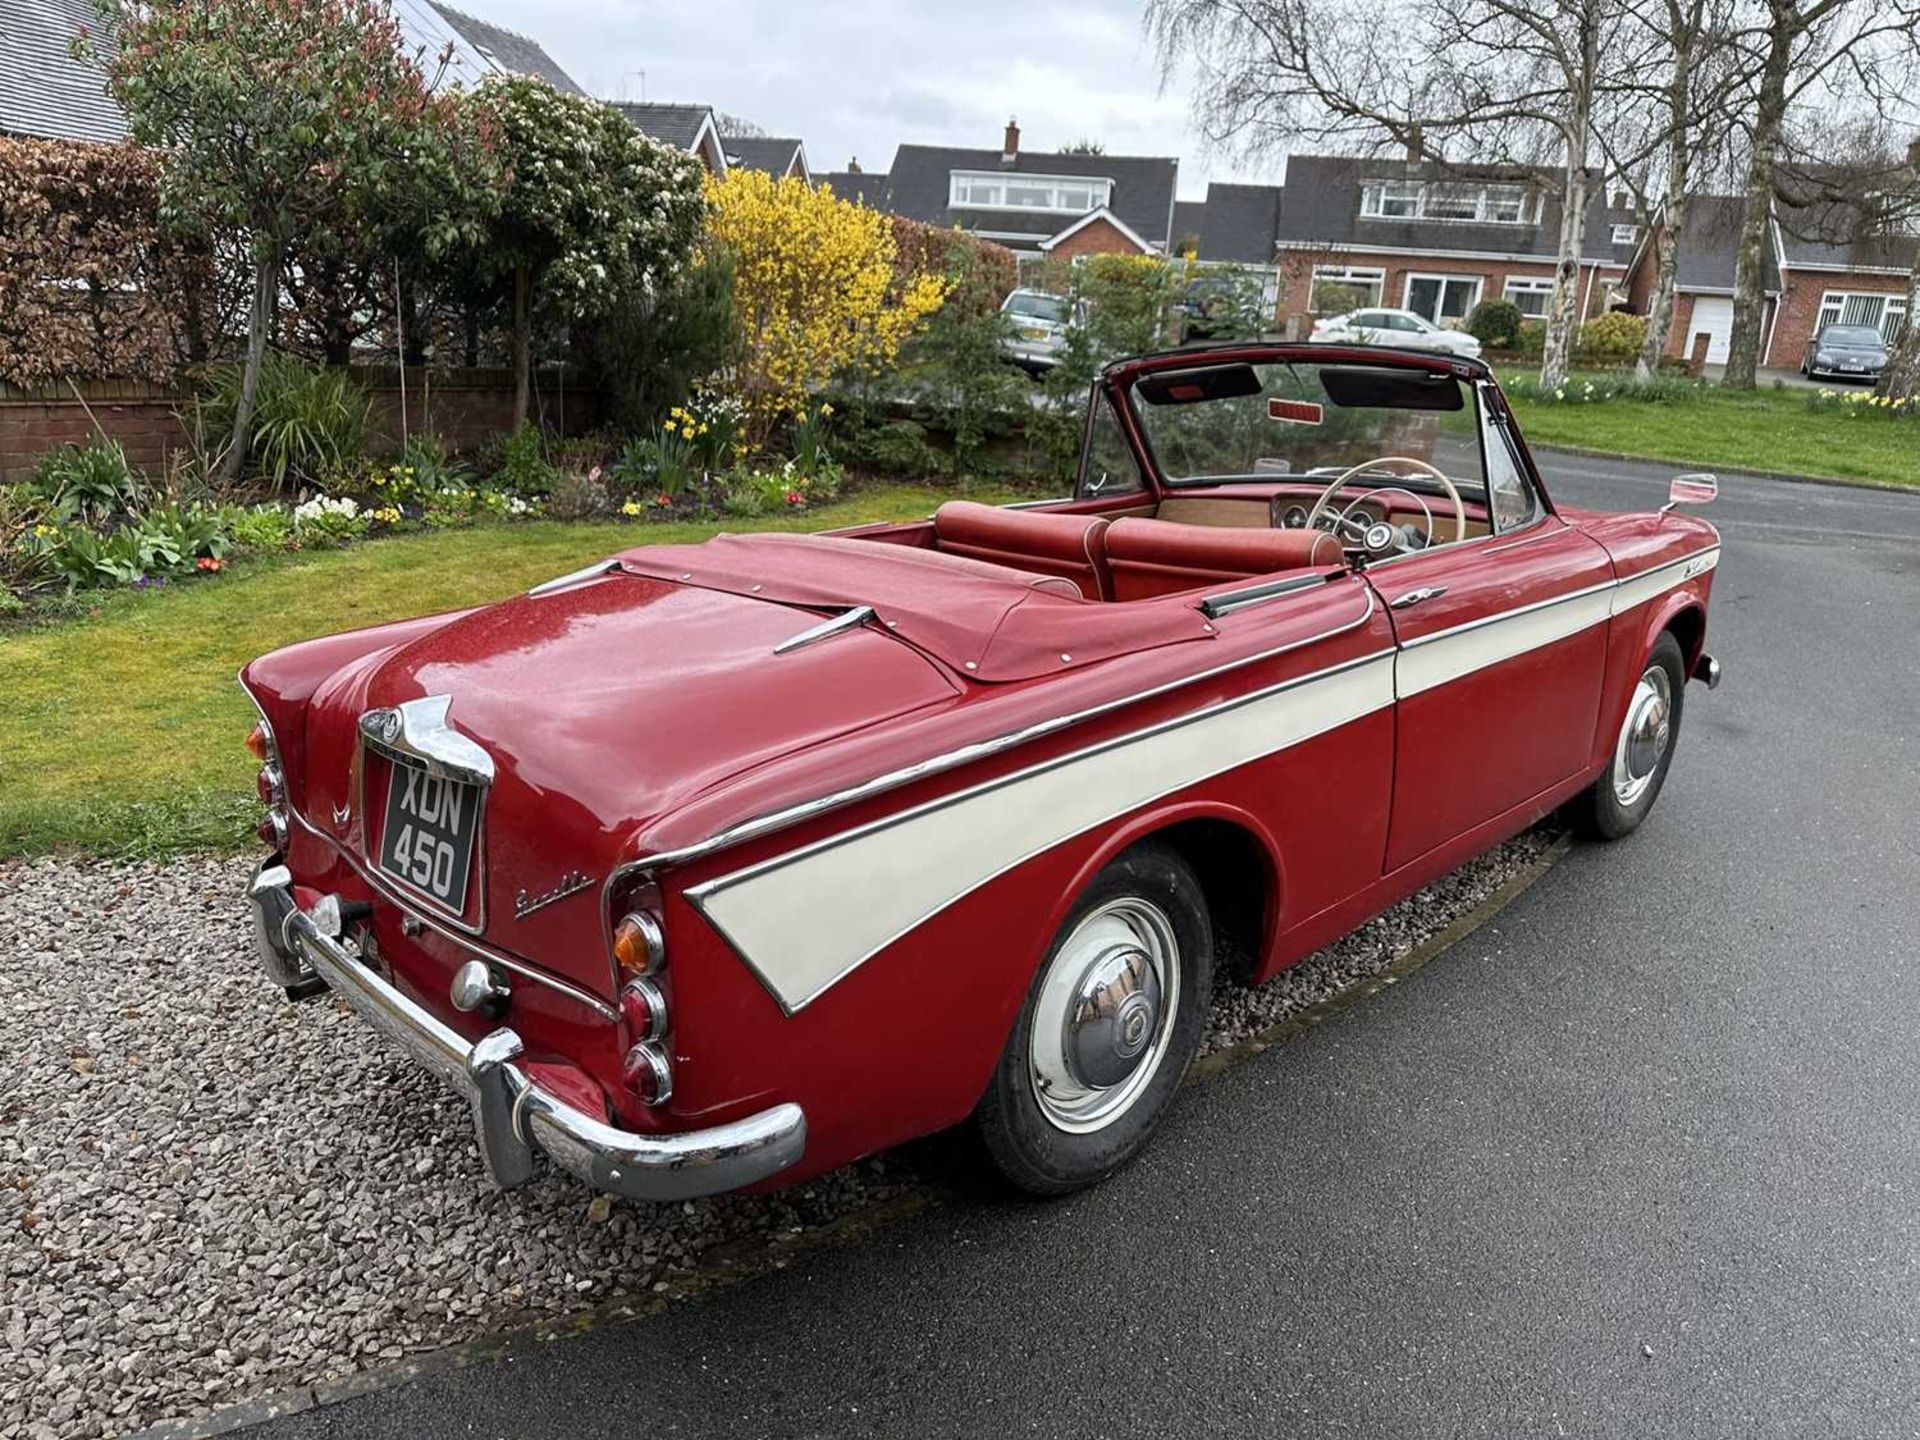 1961 Singer Gazelle Convertible Comes complete with overdrive, period radio and badge bar - Image 38 of 95